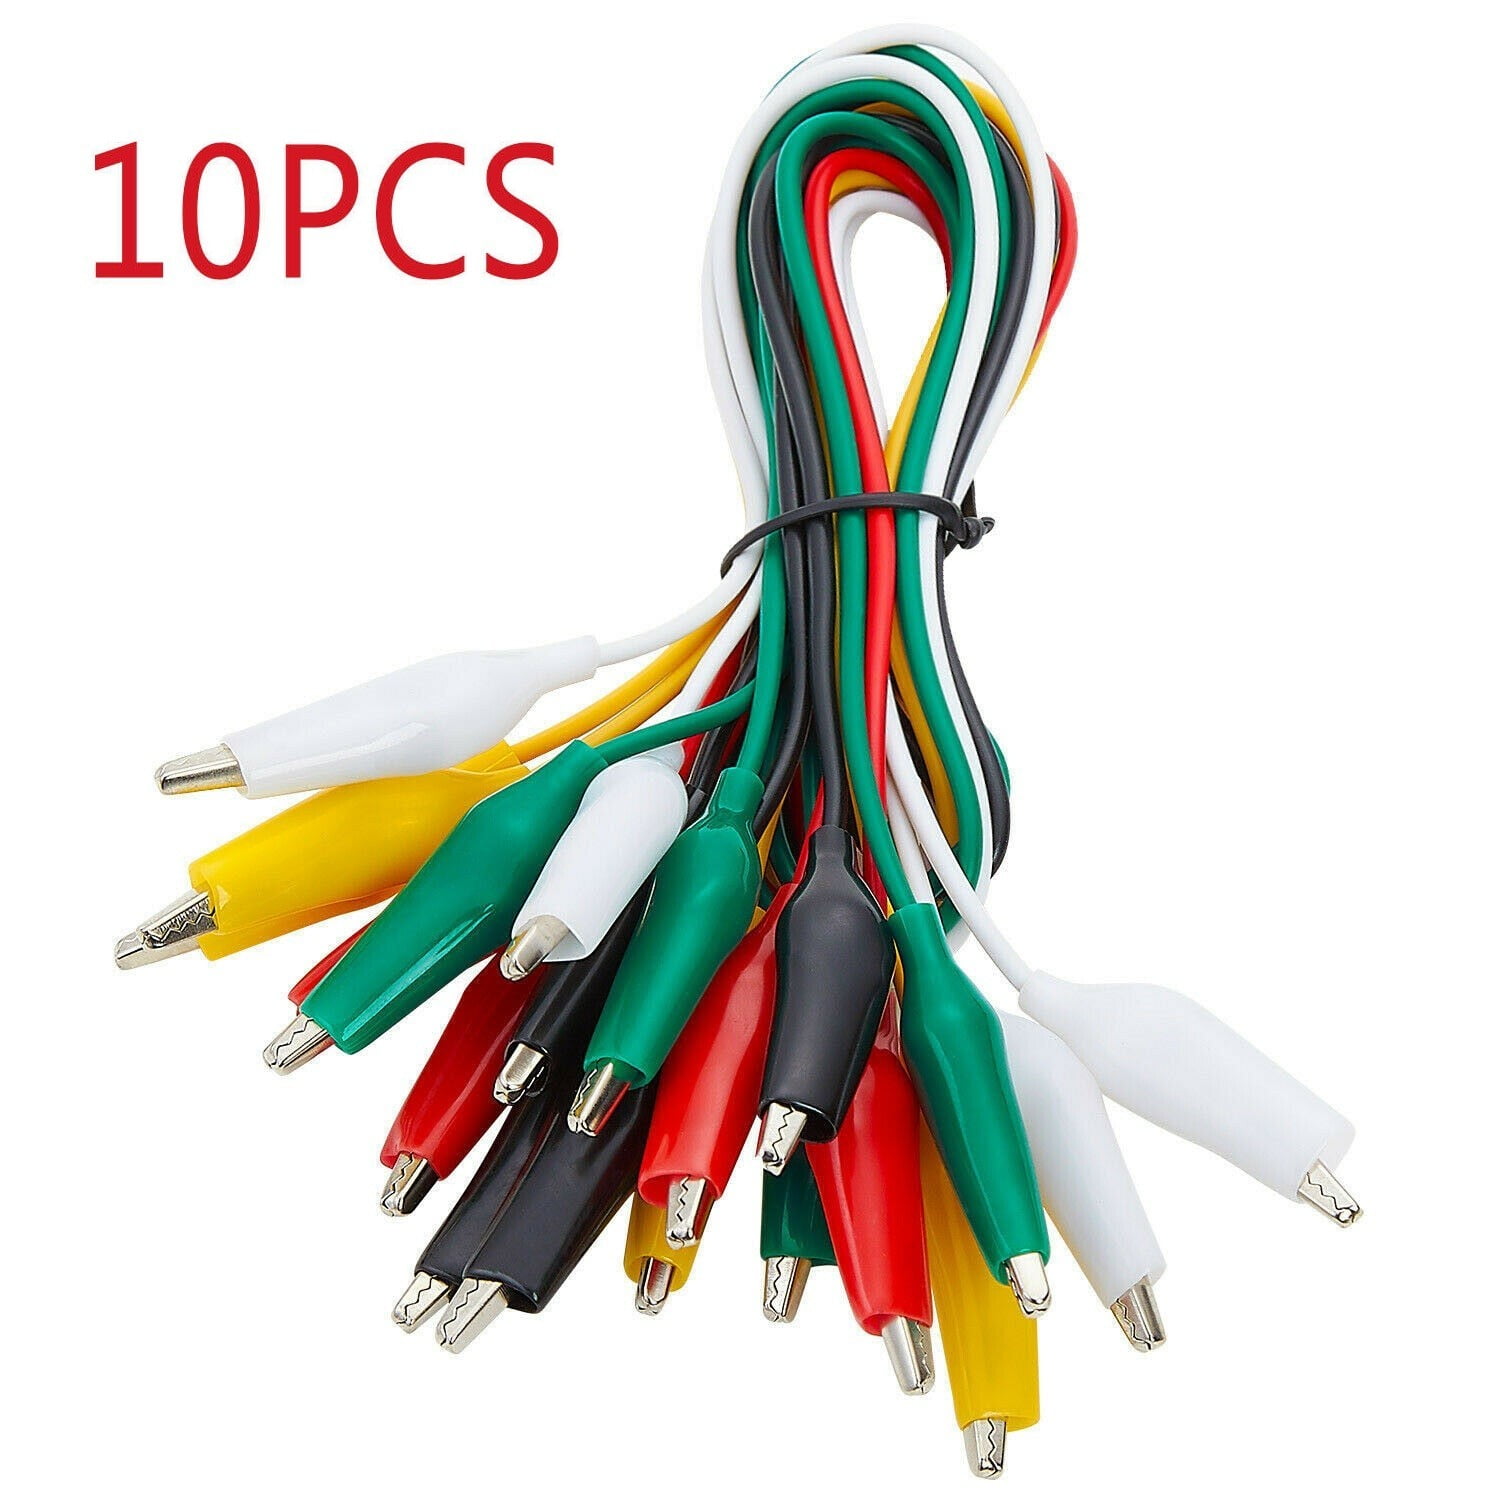 10pcs double-ended crocodile clips cable alligator clips wire testing wire~PL 